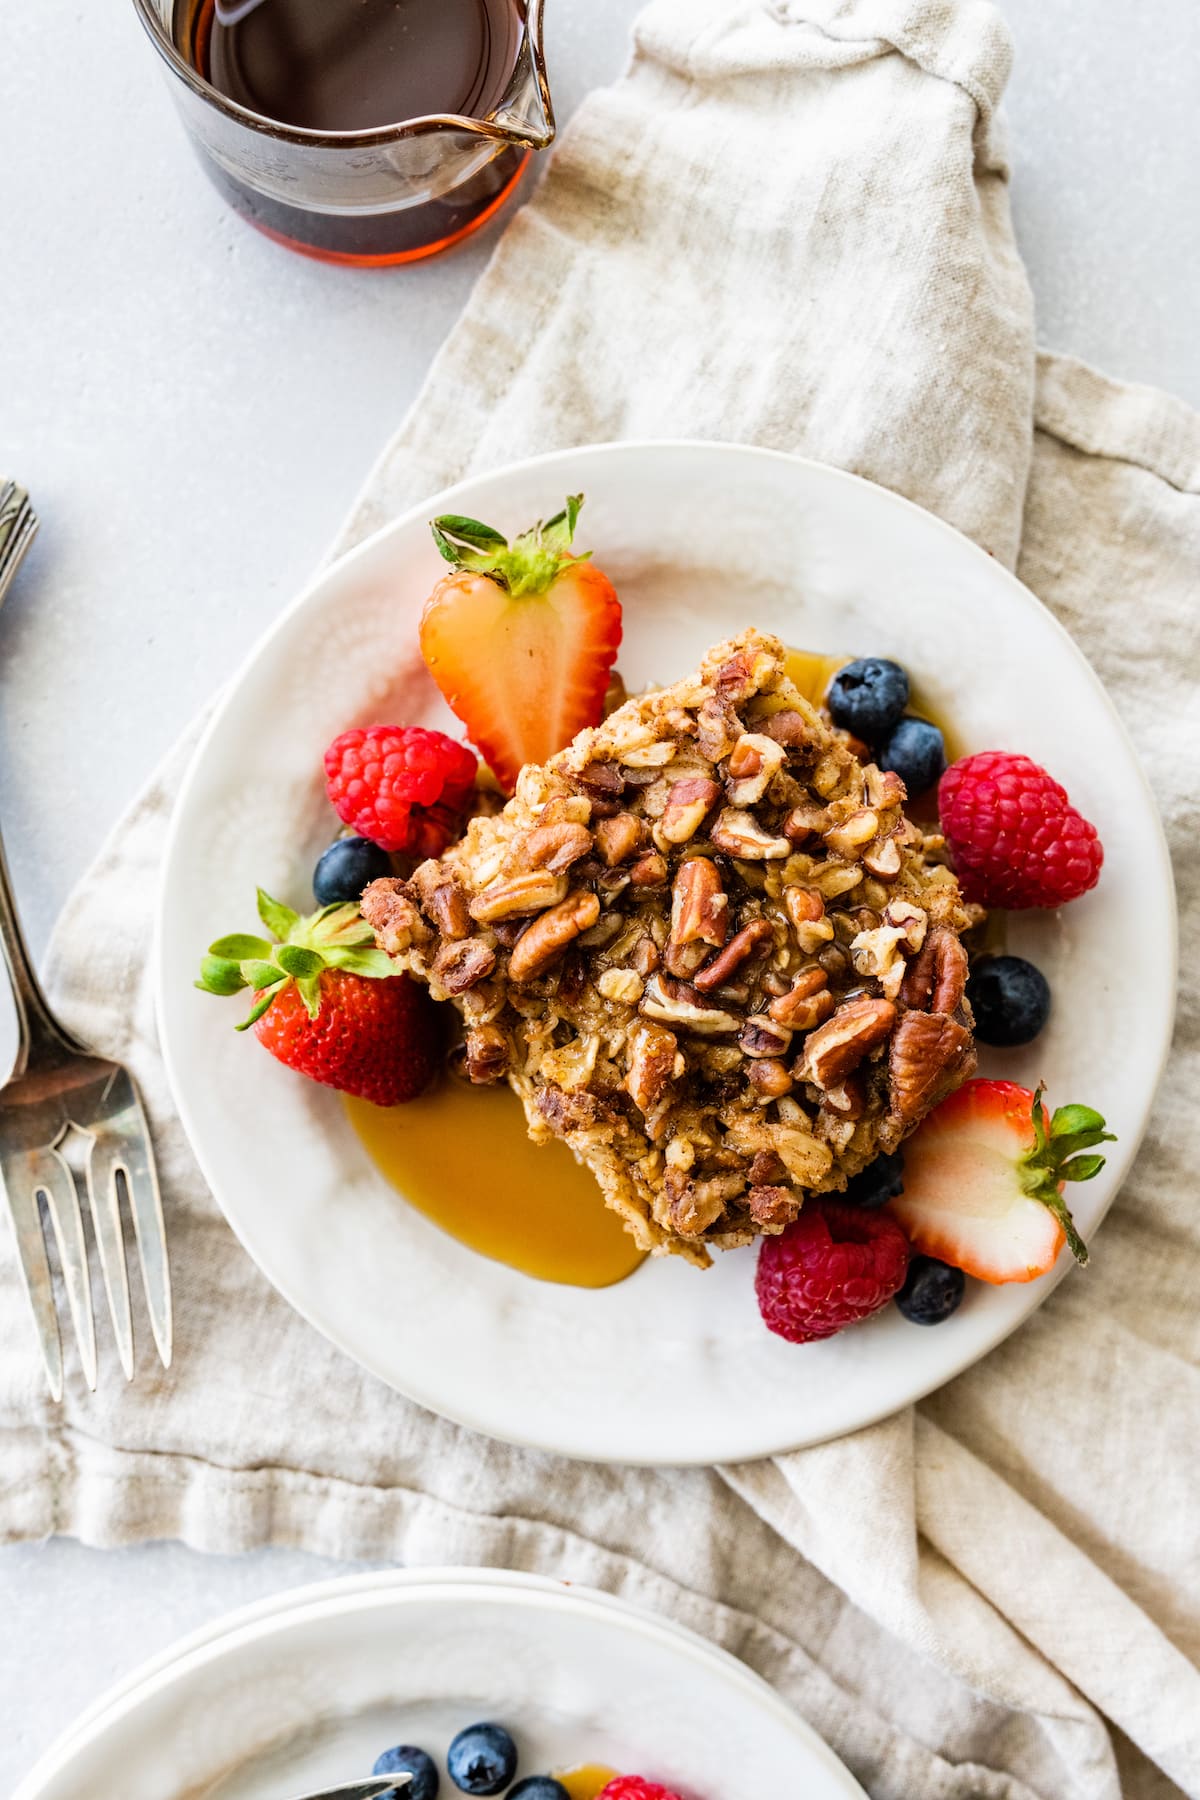 A slice of baked oatmeal served on a white plate with maple syrup and fresh berries.